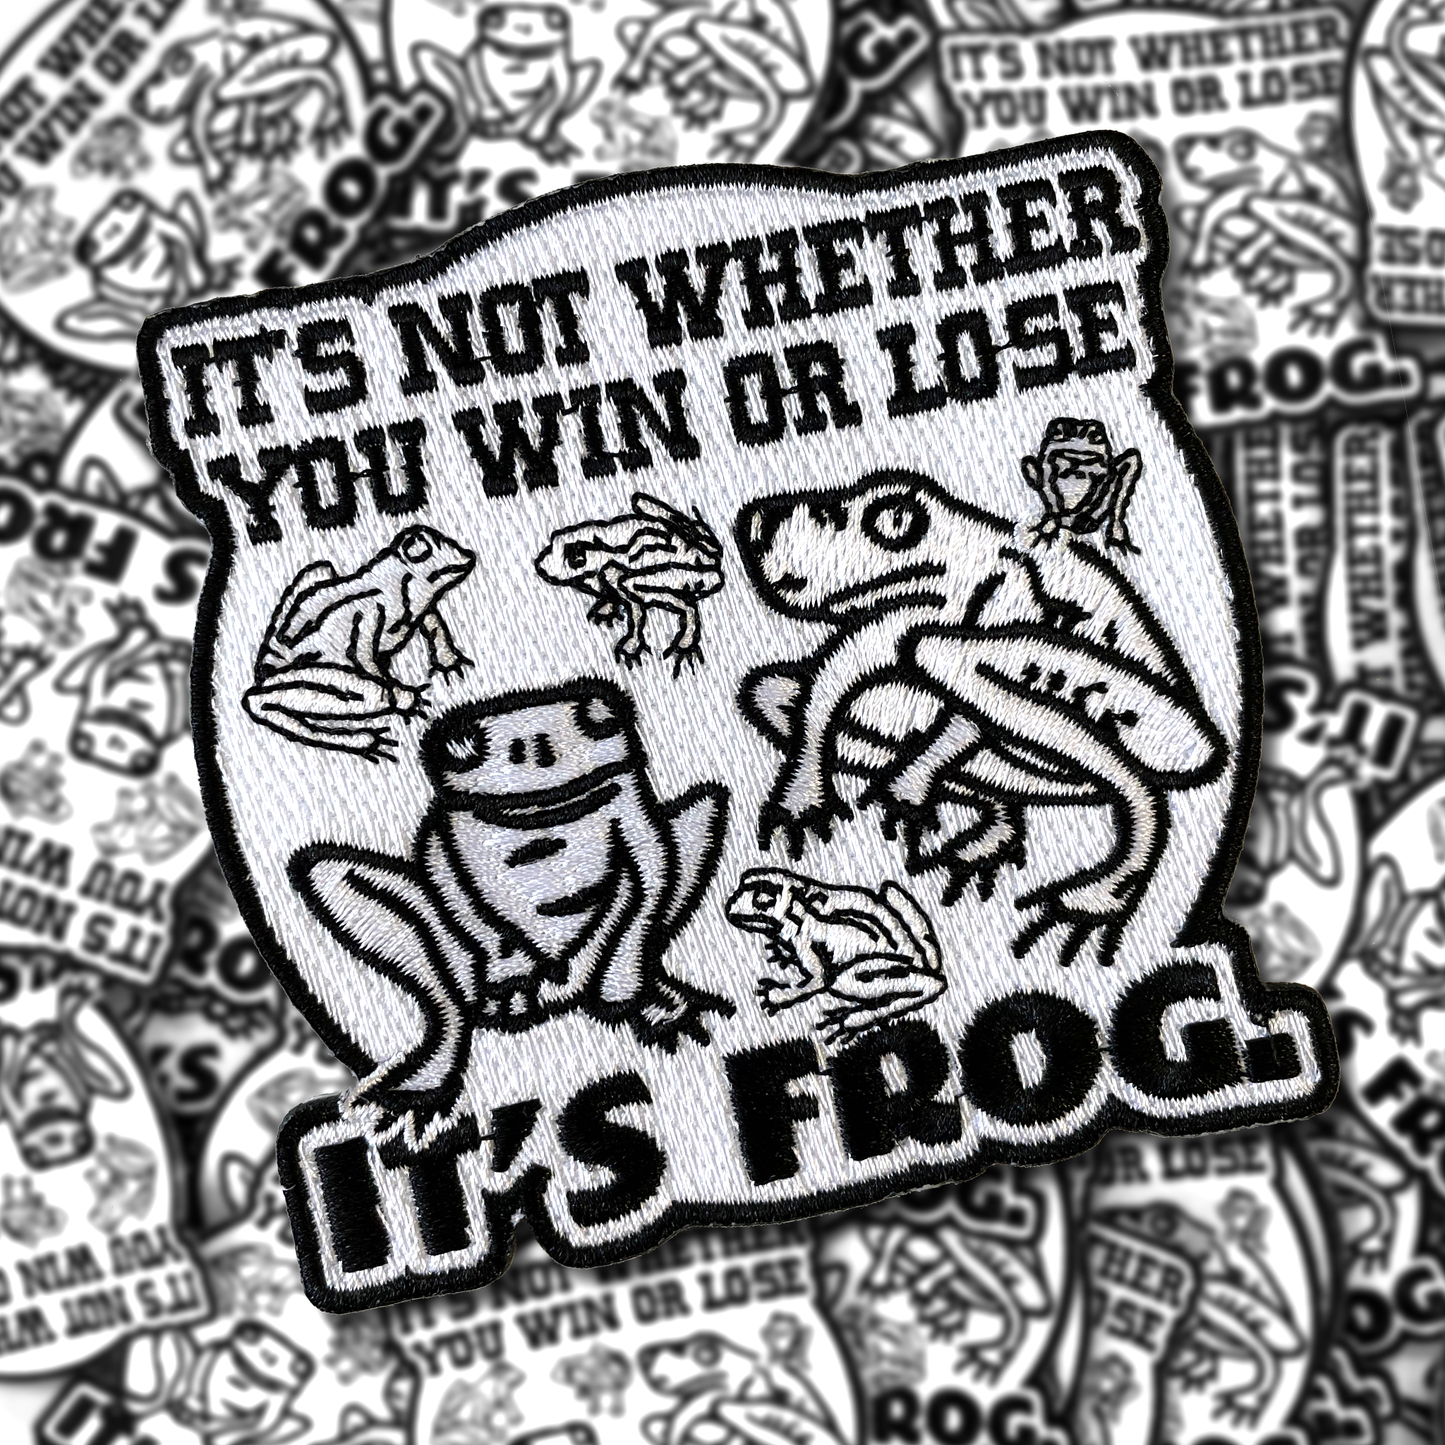 "It's Frog" Patch